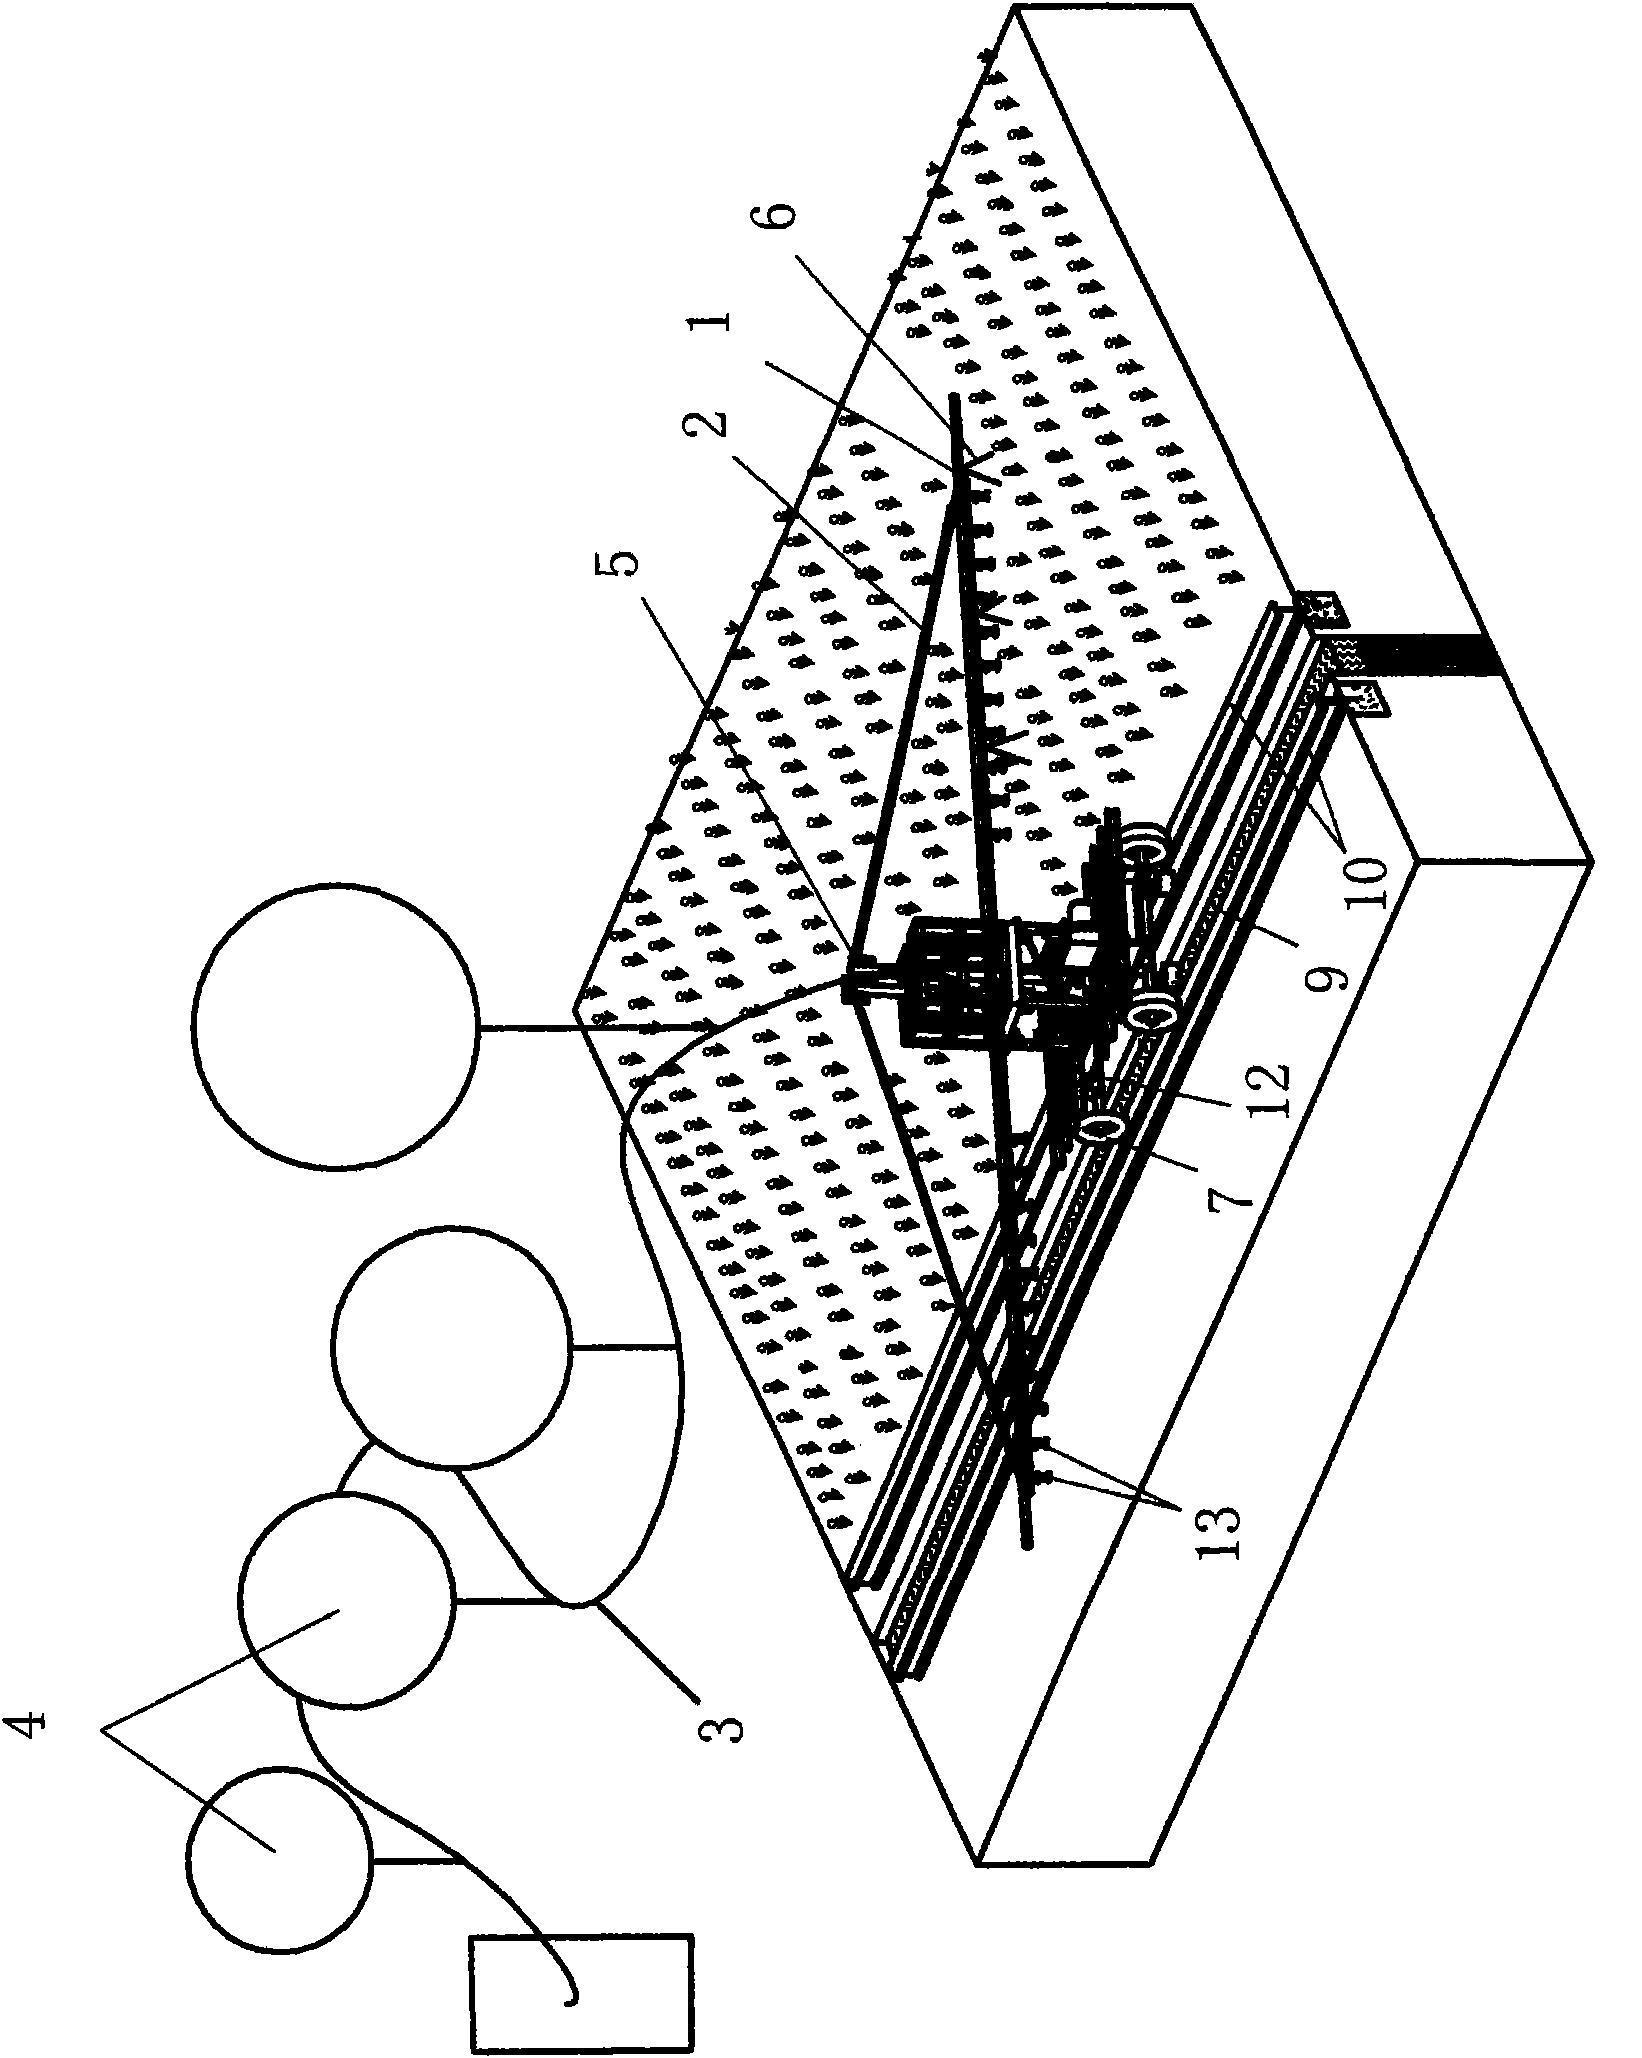 Movable support type irrigation device